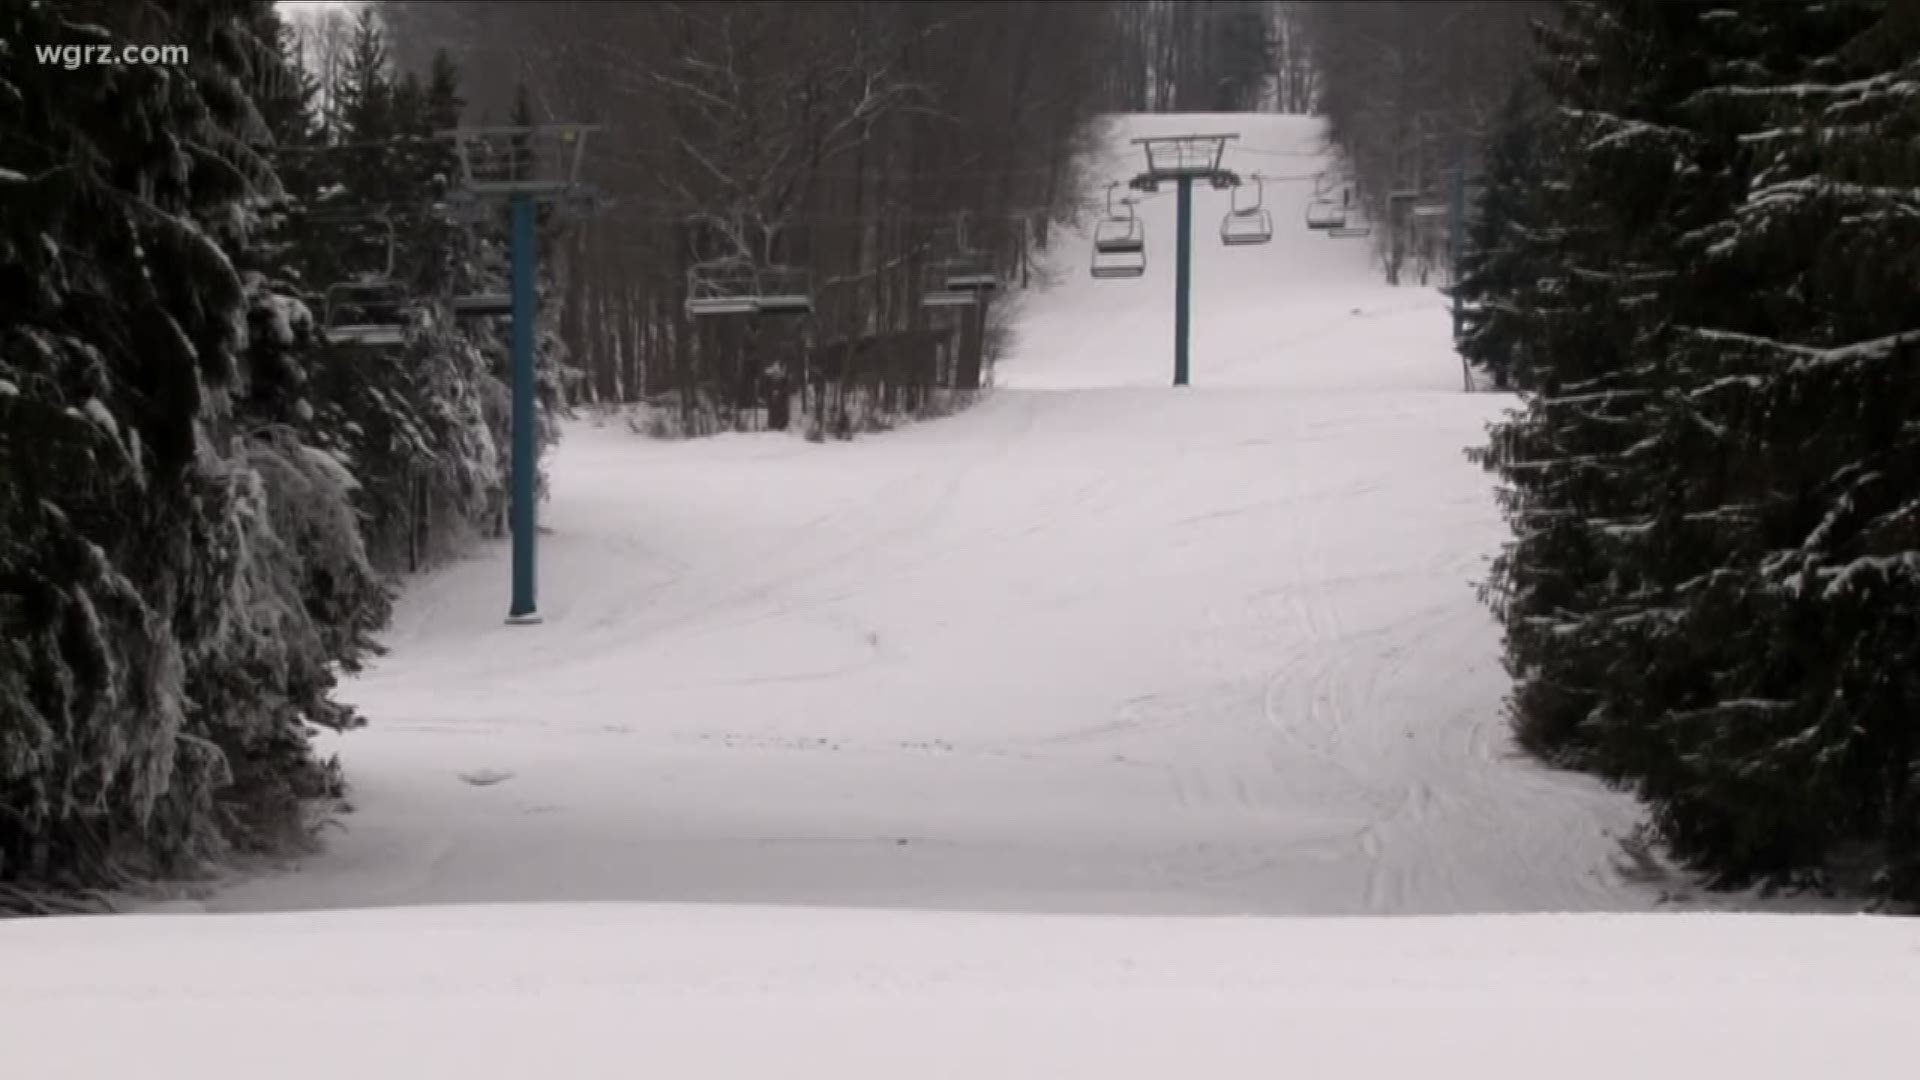 Holimont opens for the season today